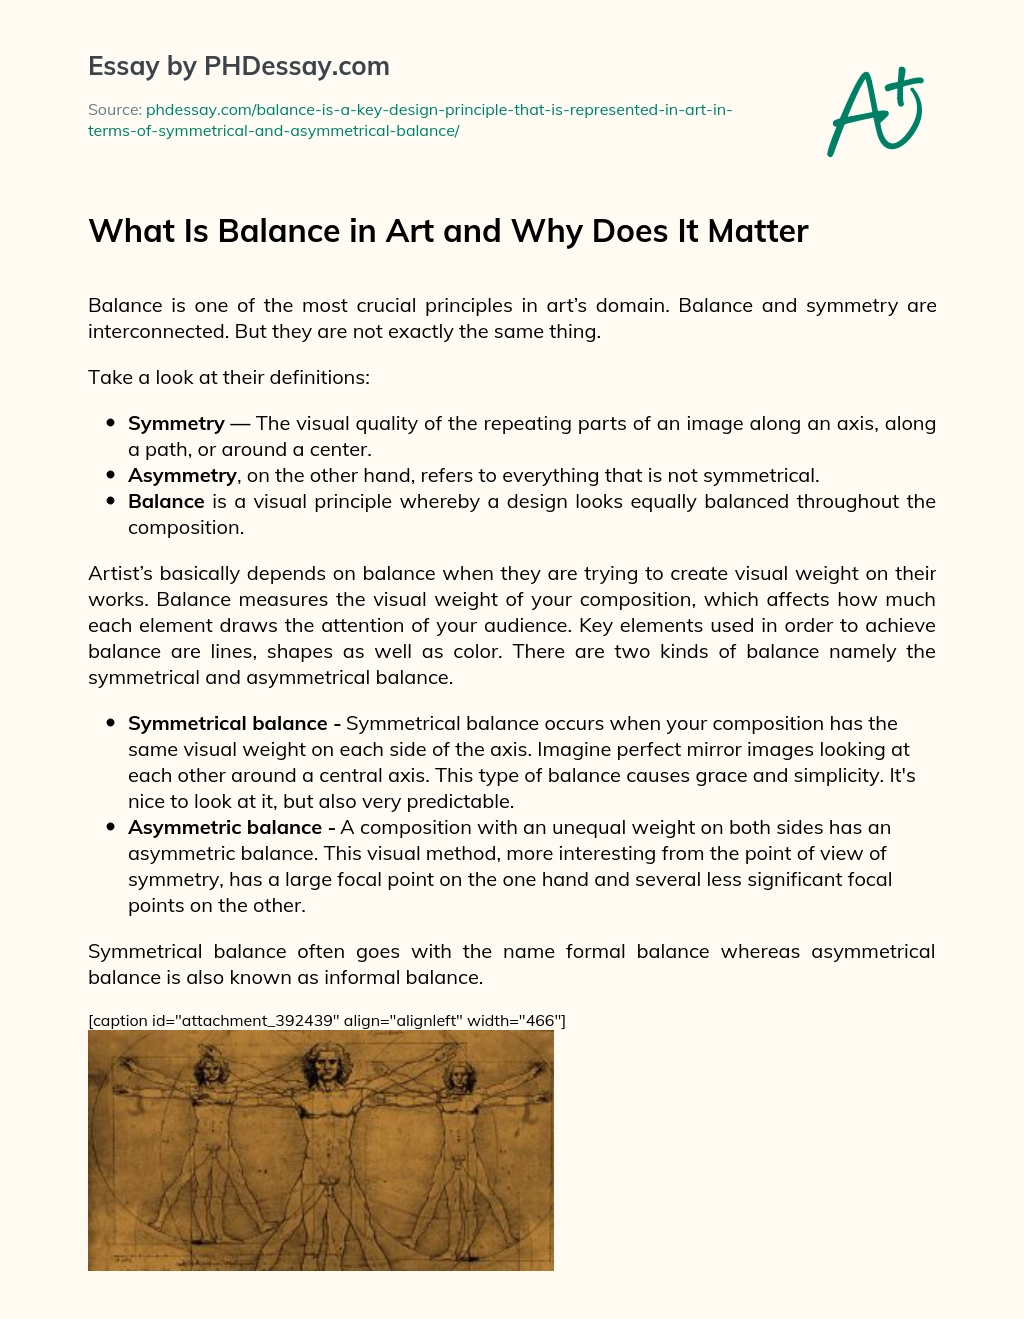 What Is Balance in Art and Why Does It Matter essay